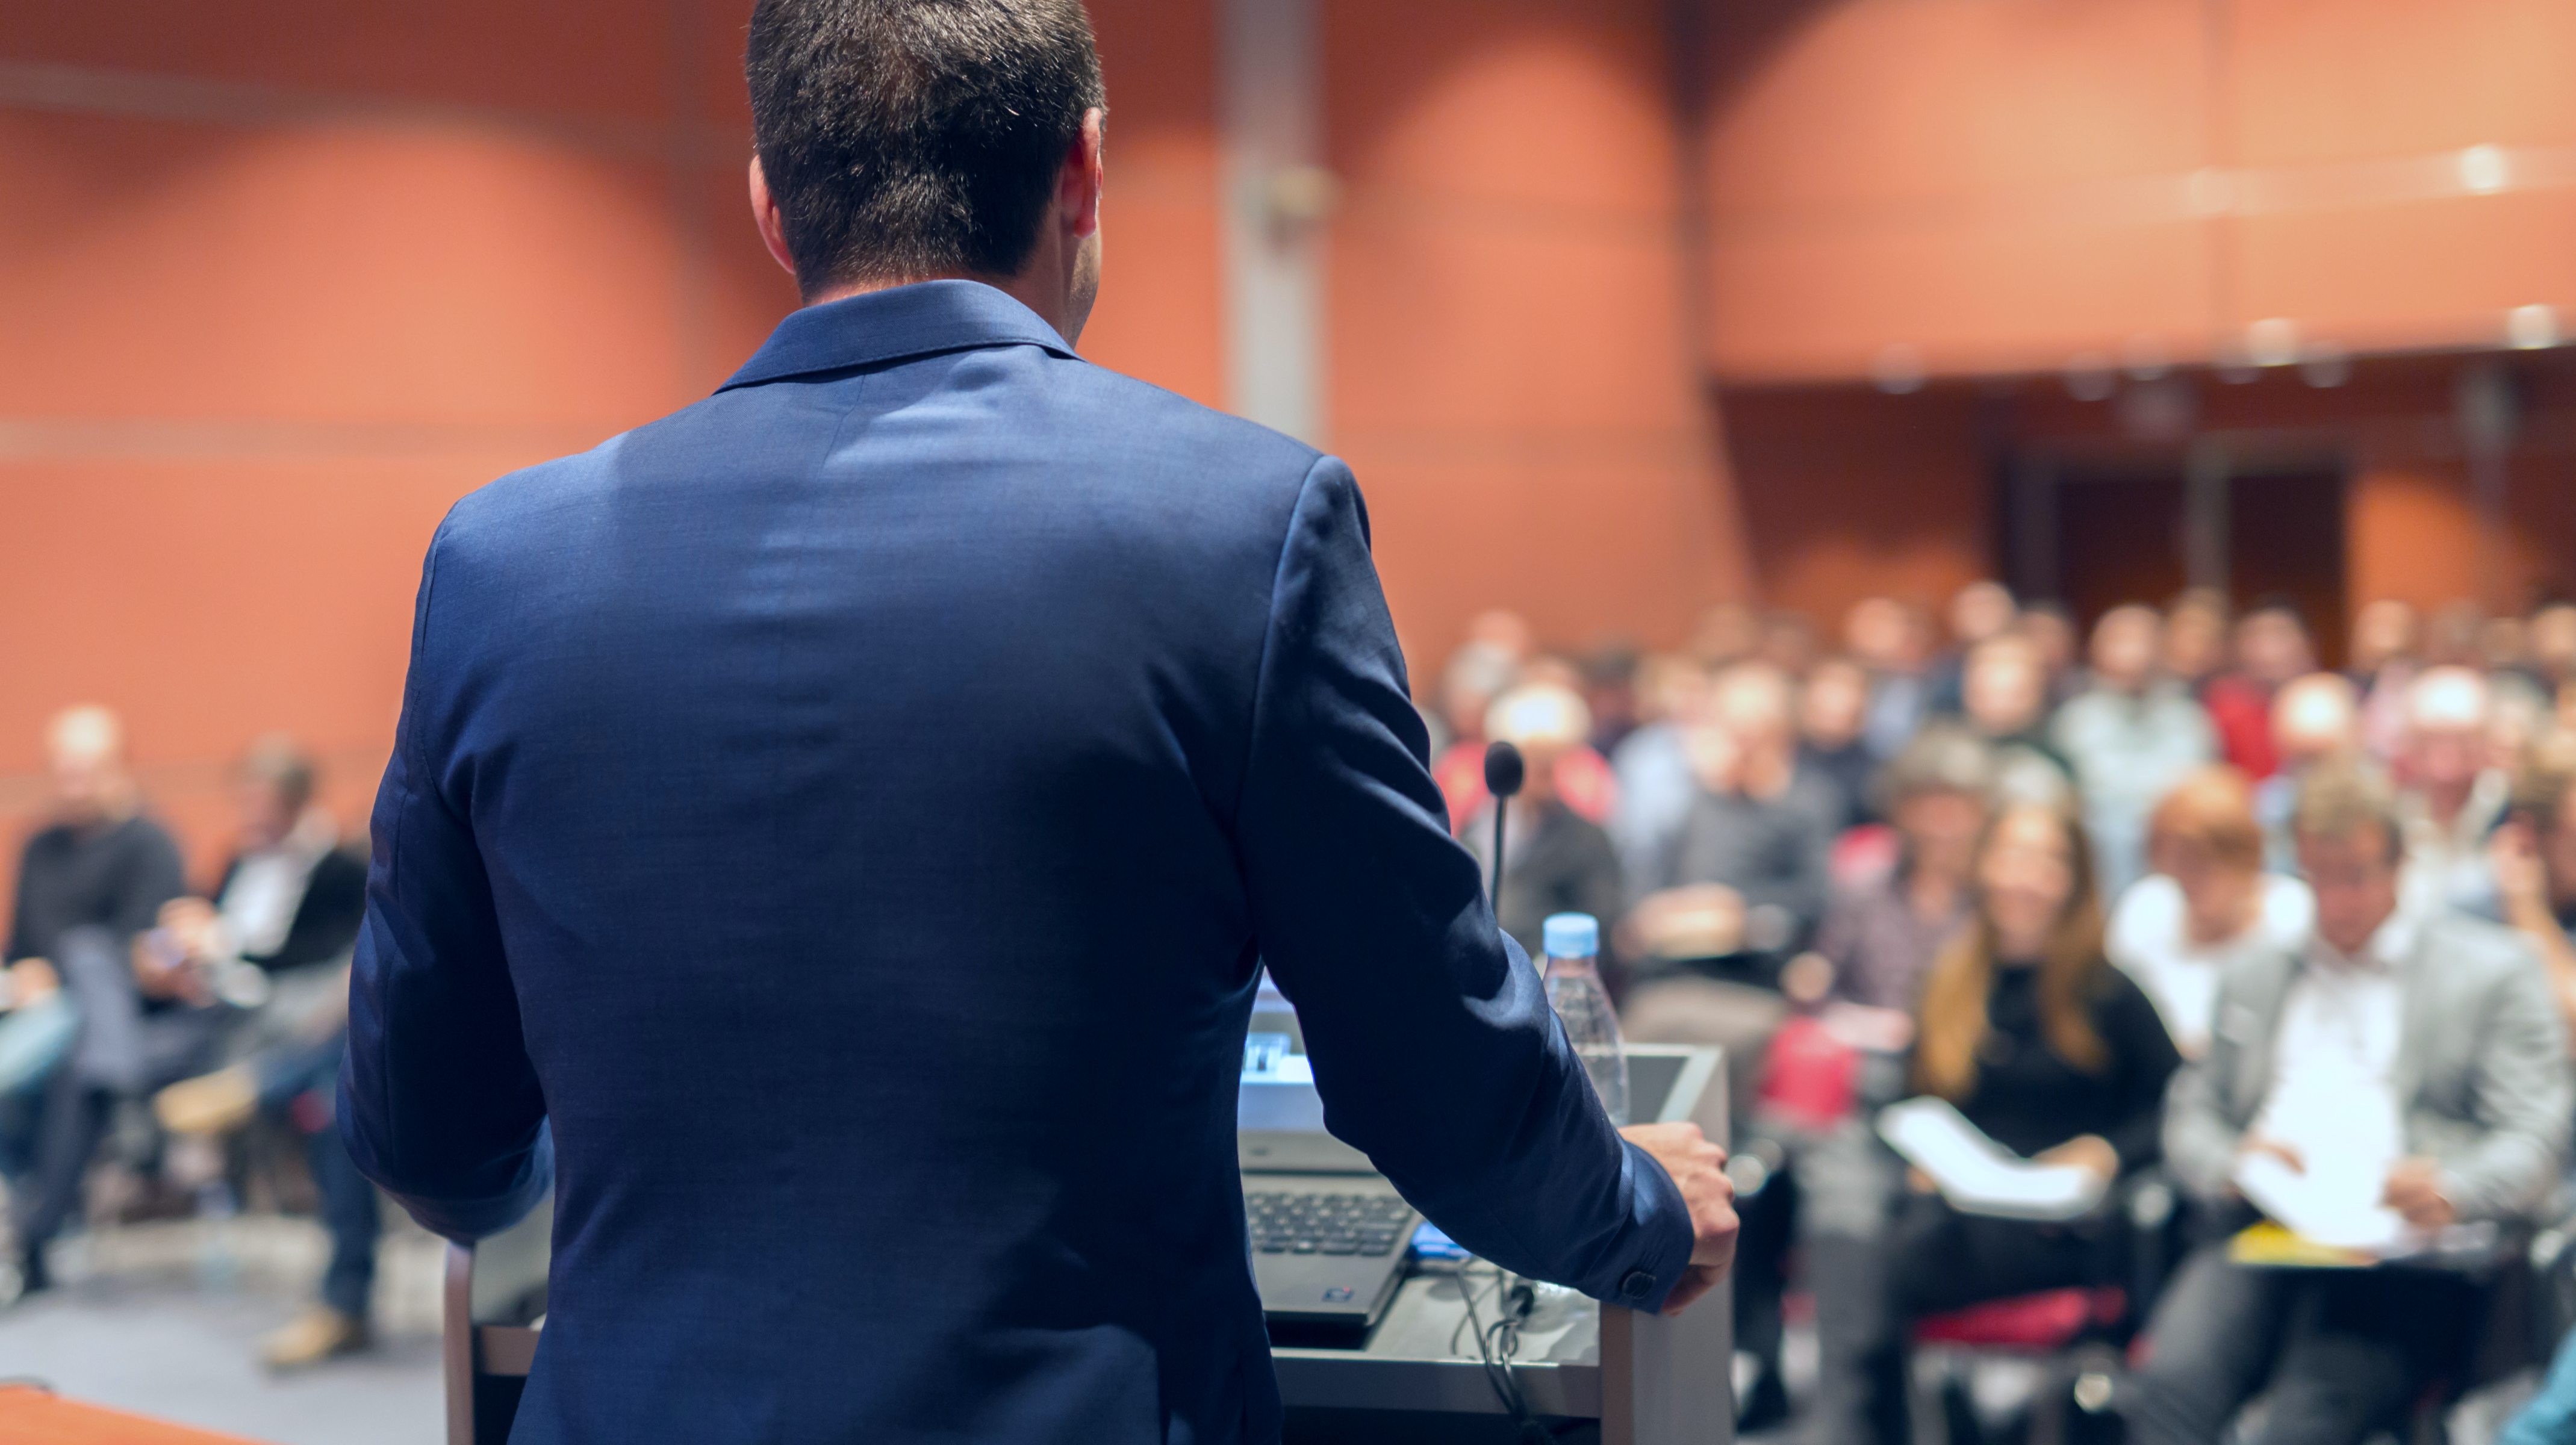 4 Proven Tips for CEOs to Project Confidence During a Presentation